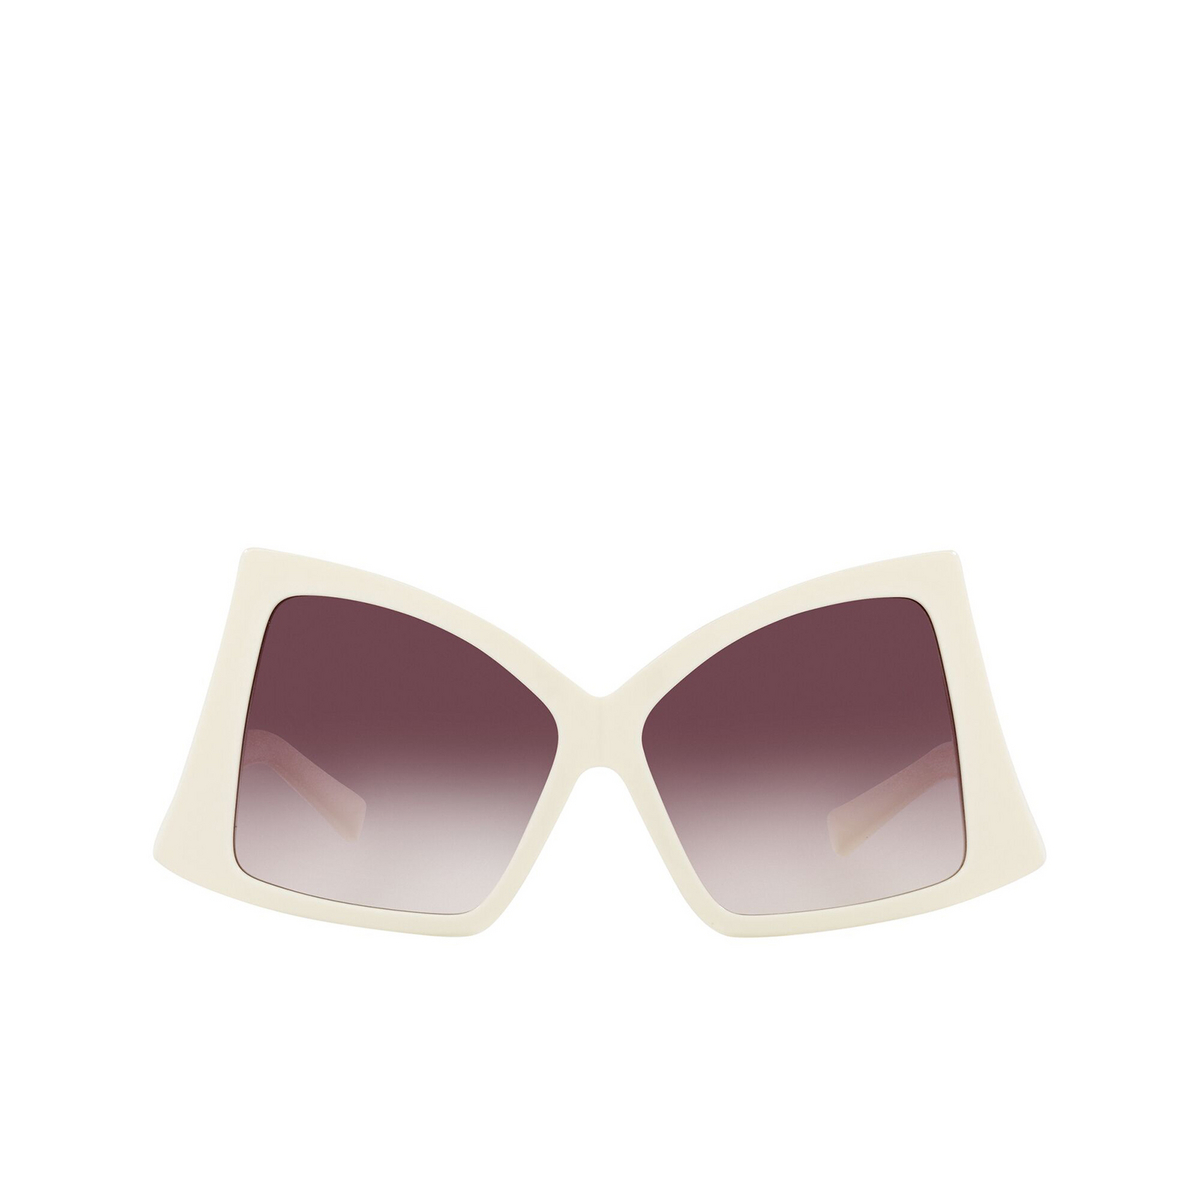 Valentino® Butterfly Sunglasses: VA4091 color Ivory 511813 - front view.